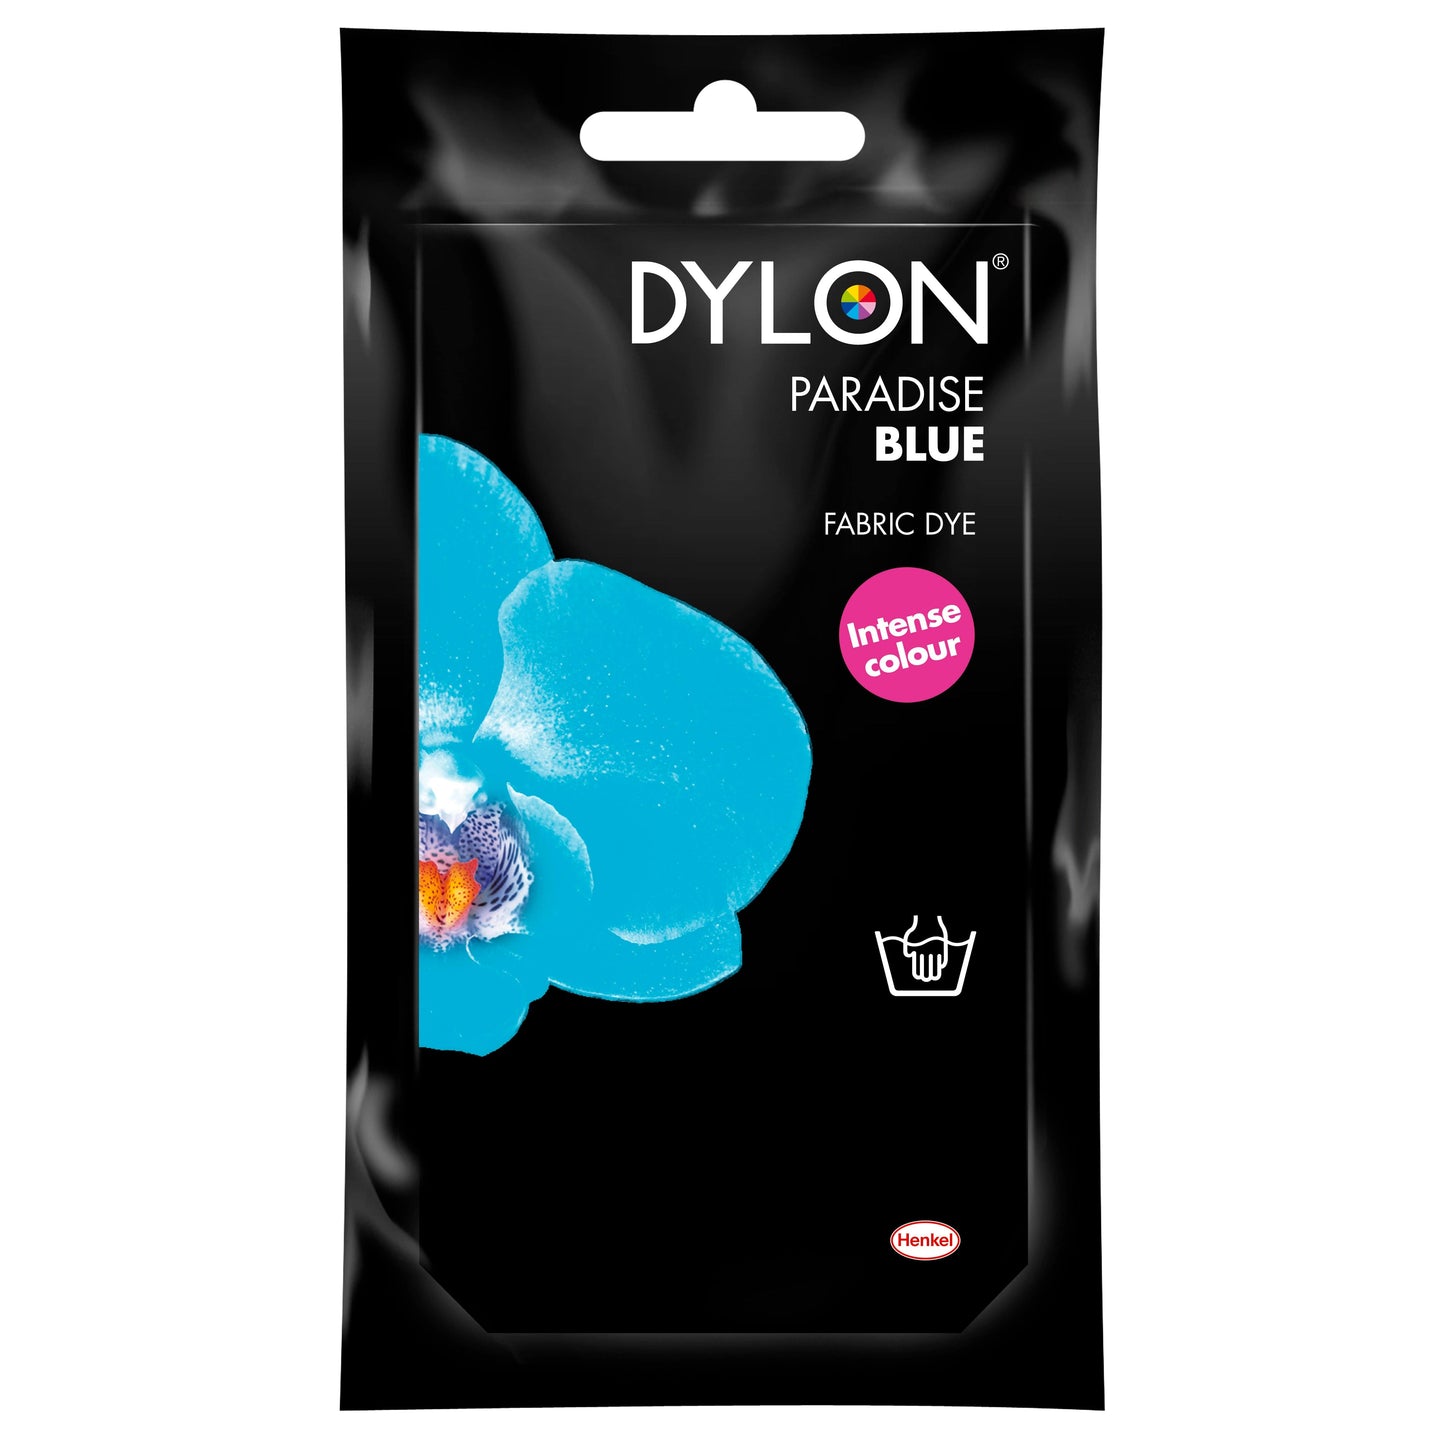 Dylon Hand Dye for Fabric in Paradise Blue